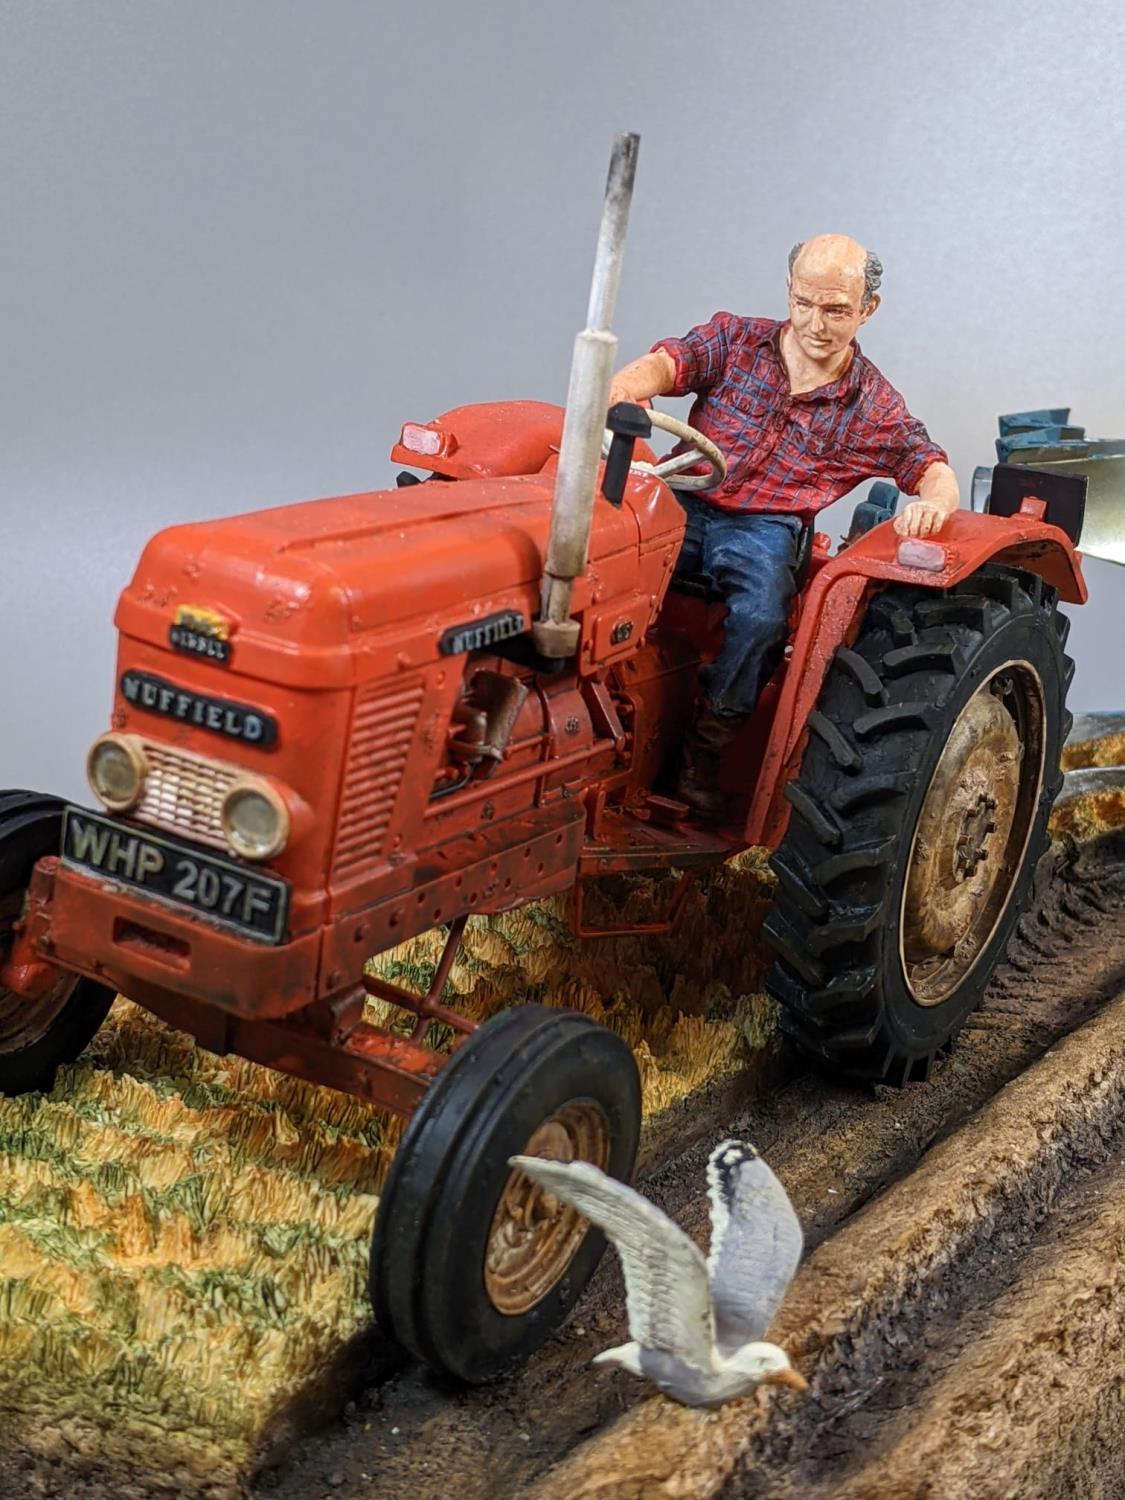 Border Fine Arts Classics Sculpture, 'Reversible Ploughing', No. 646 of a limited edition of 1500, - Image 2 of 2